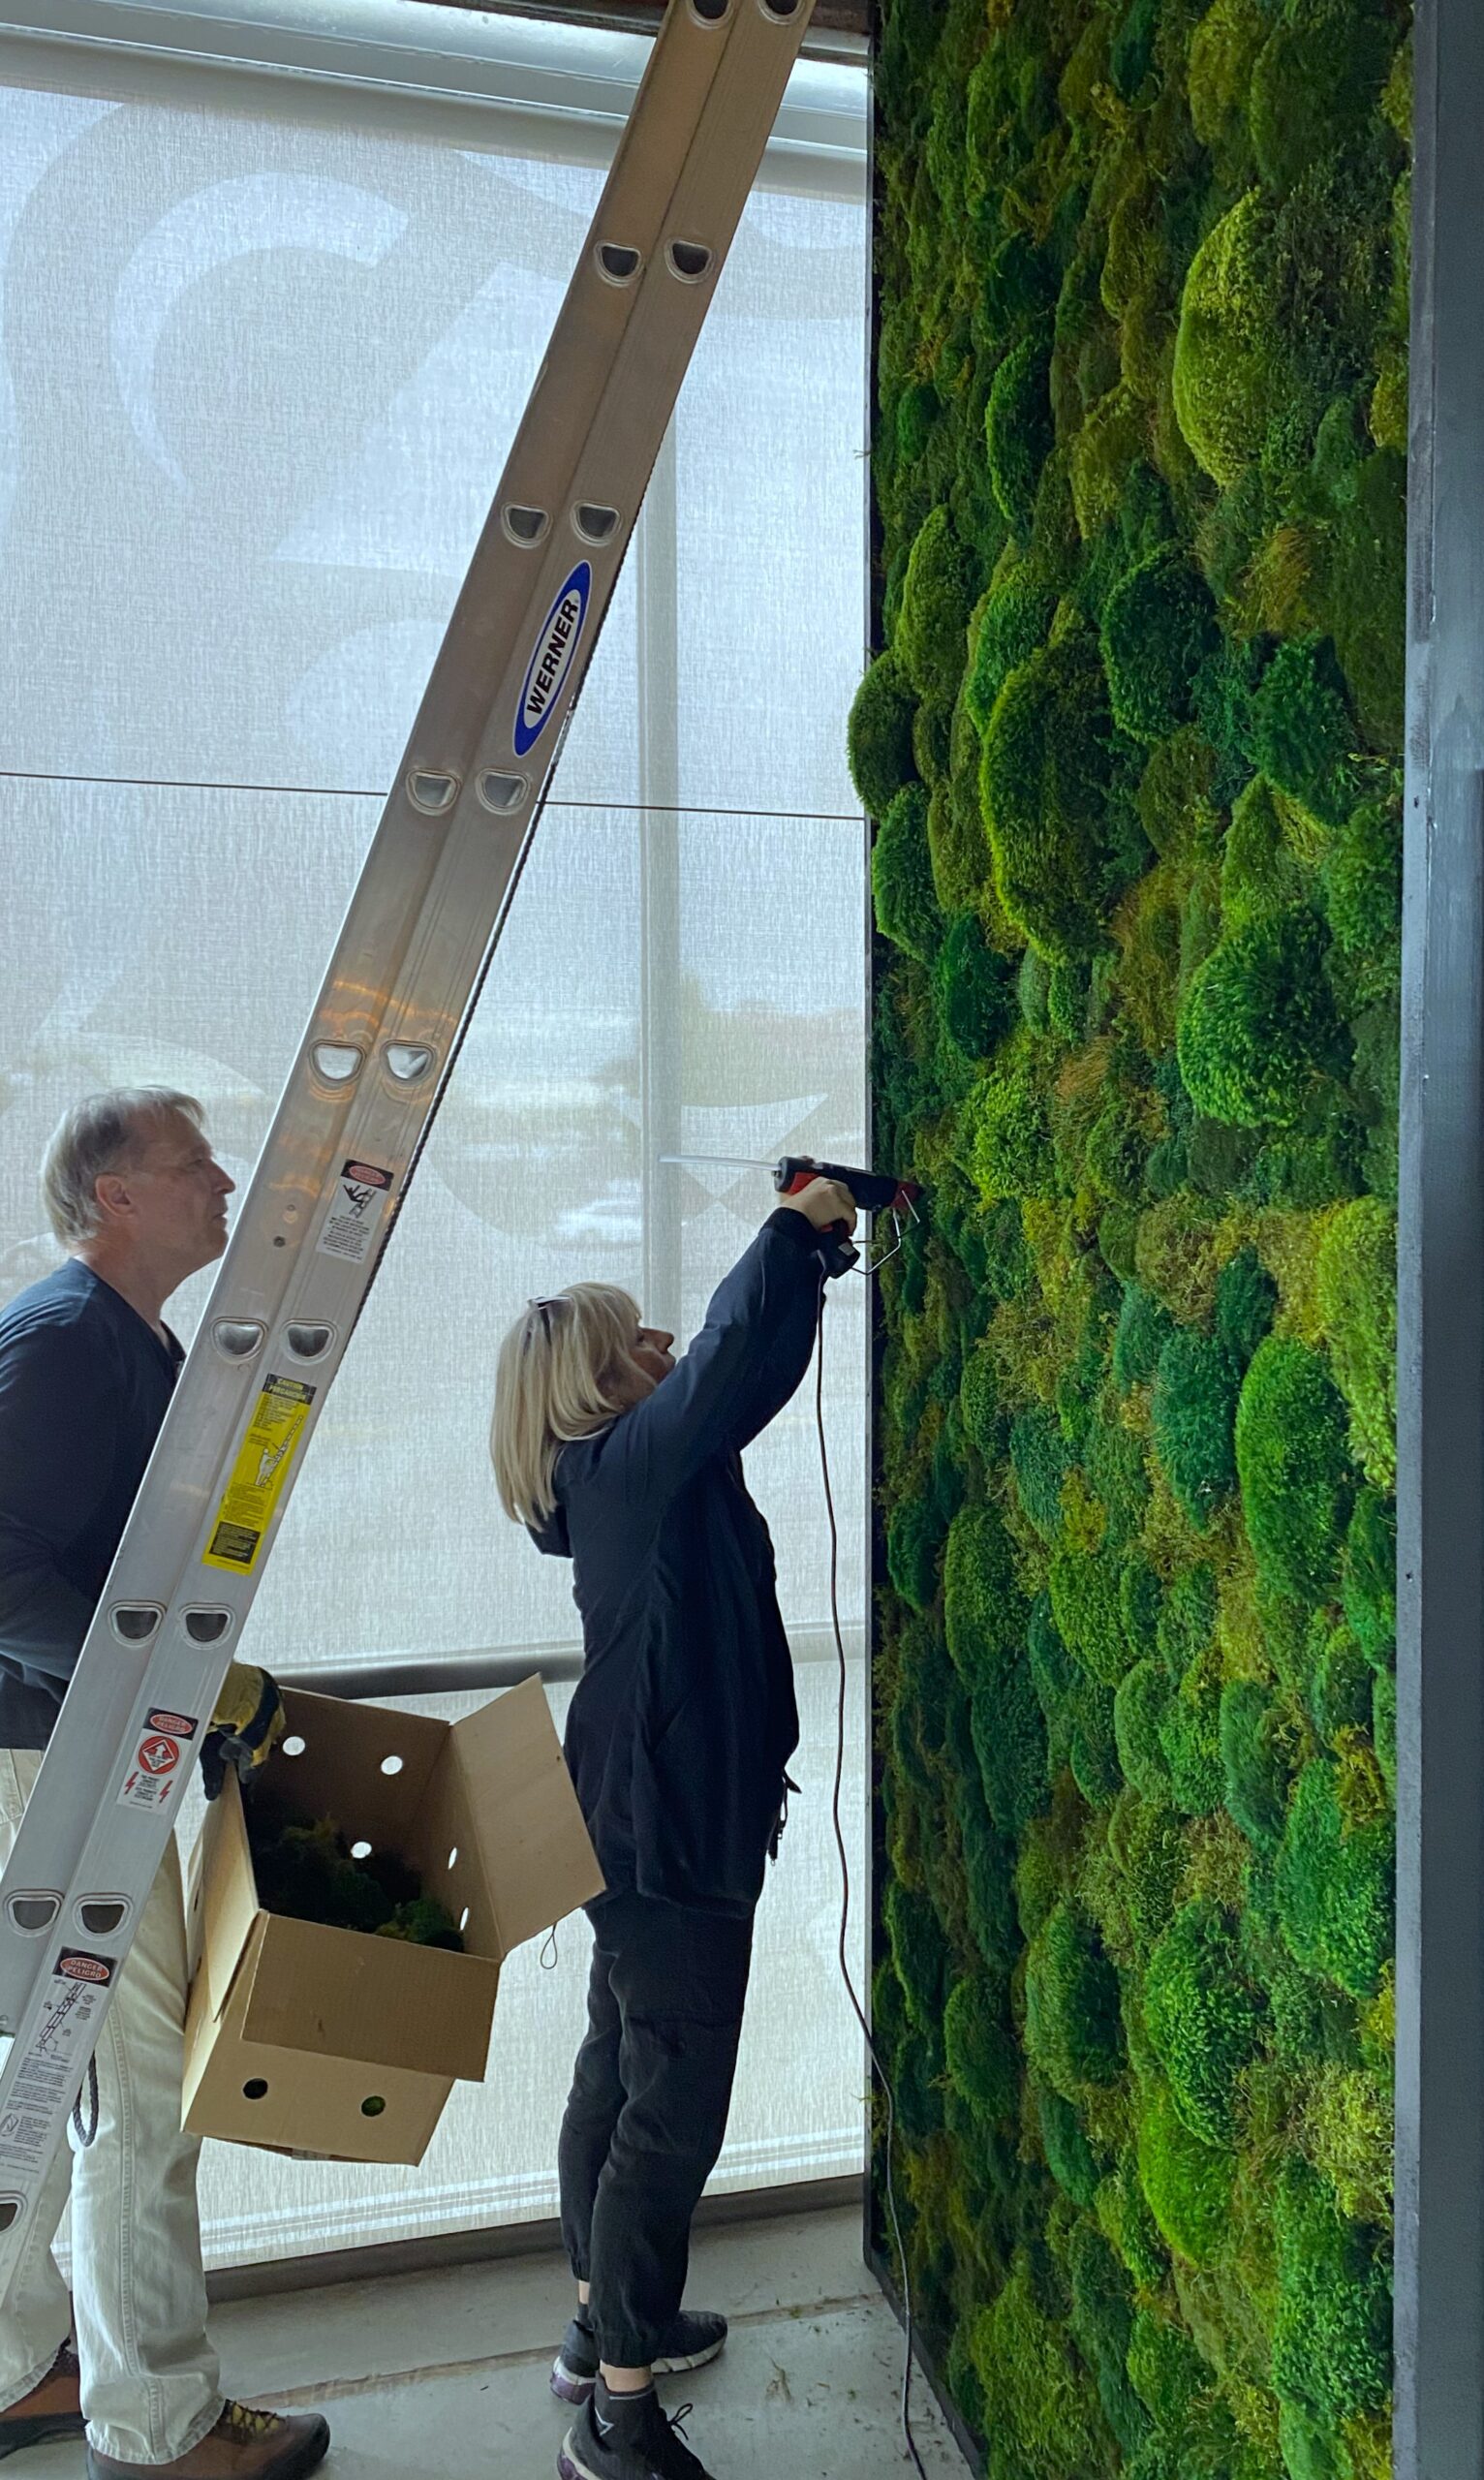 Moss wall installation in Hogshead KC located on the plaza in Kansas City, MO.